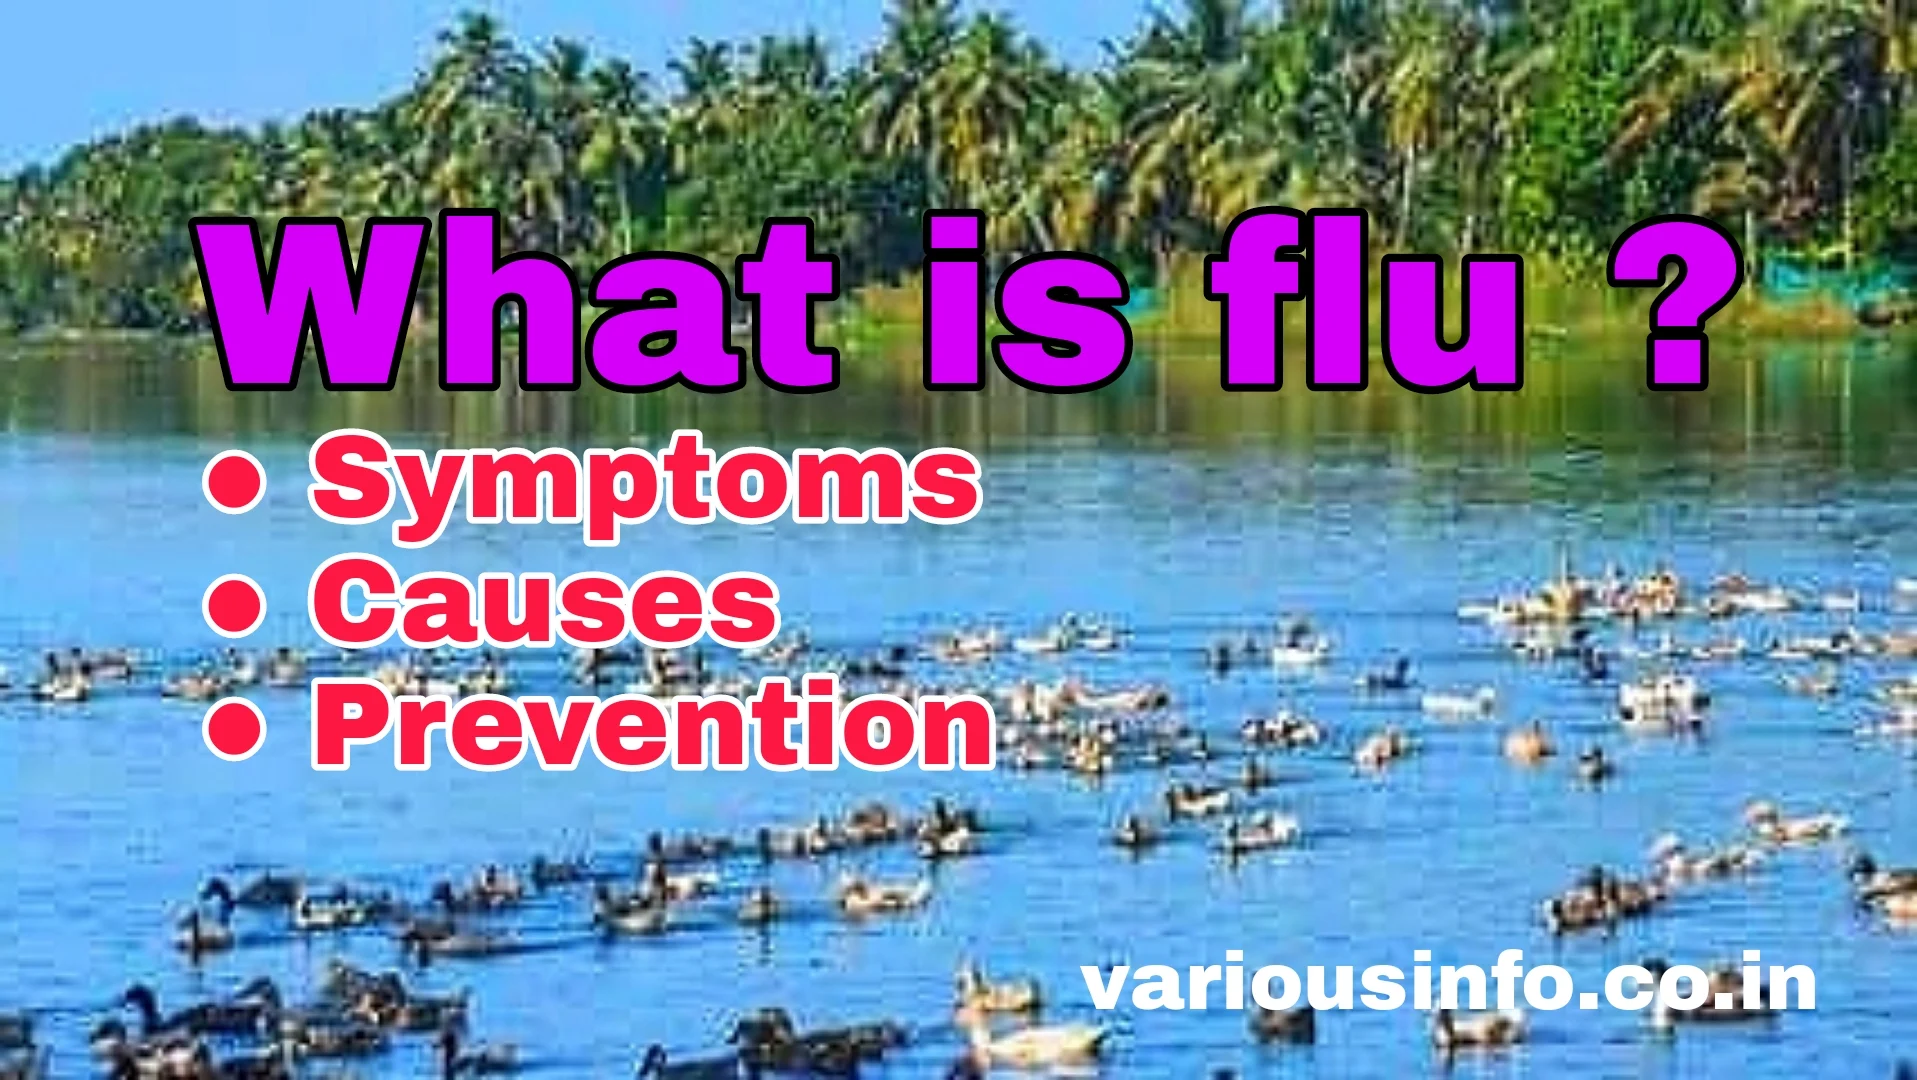 What is avian flu  Bird Flu Virus, Another Name, Symptoms and Identification, Causes and Risk Factors, Bird Flu Prevention